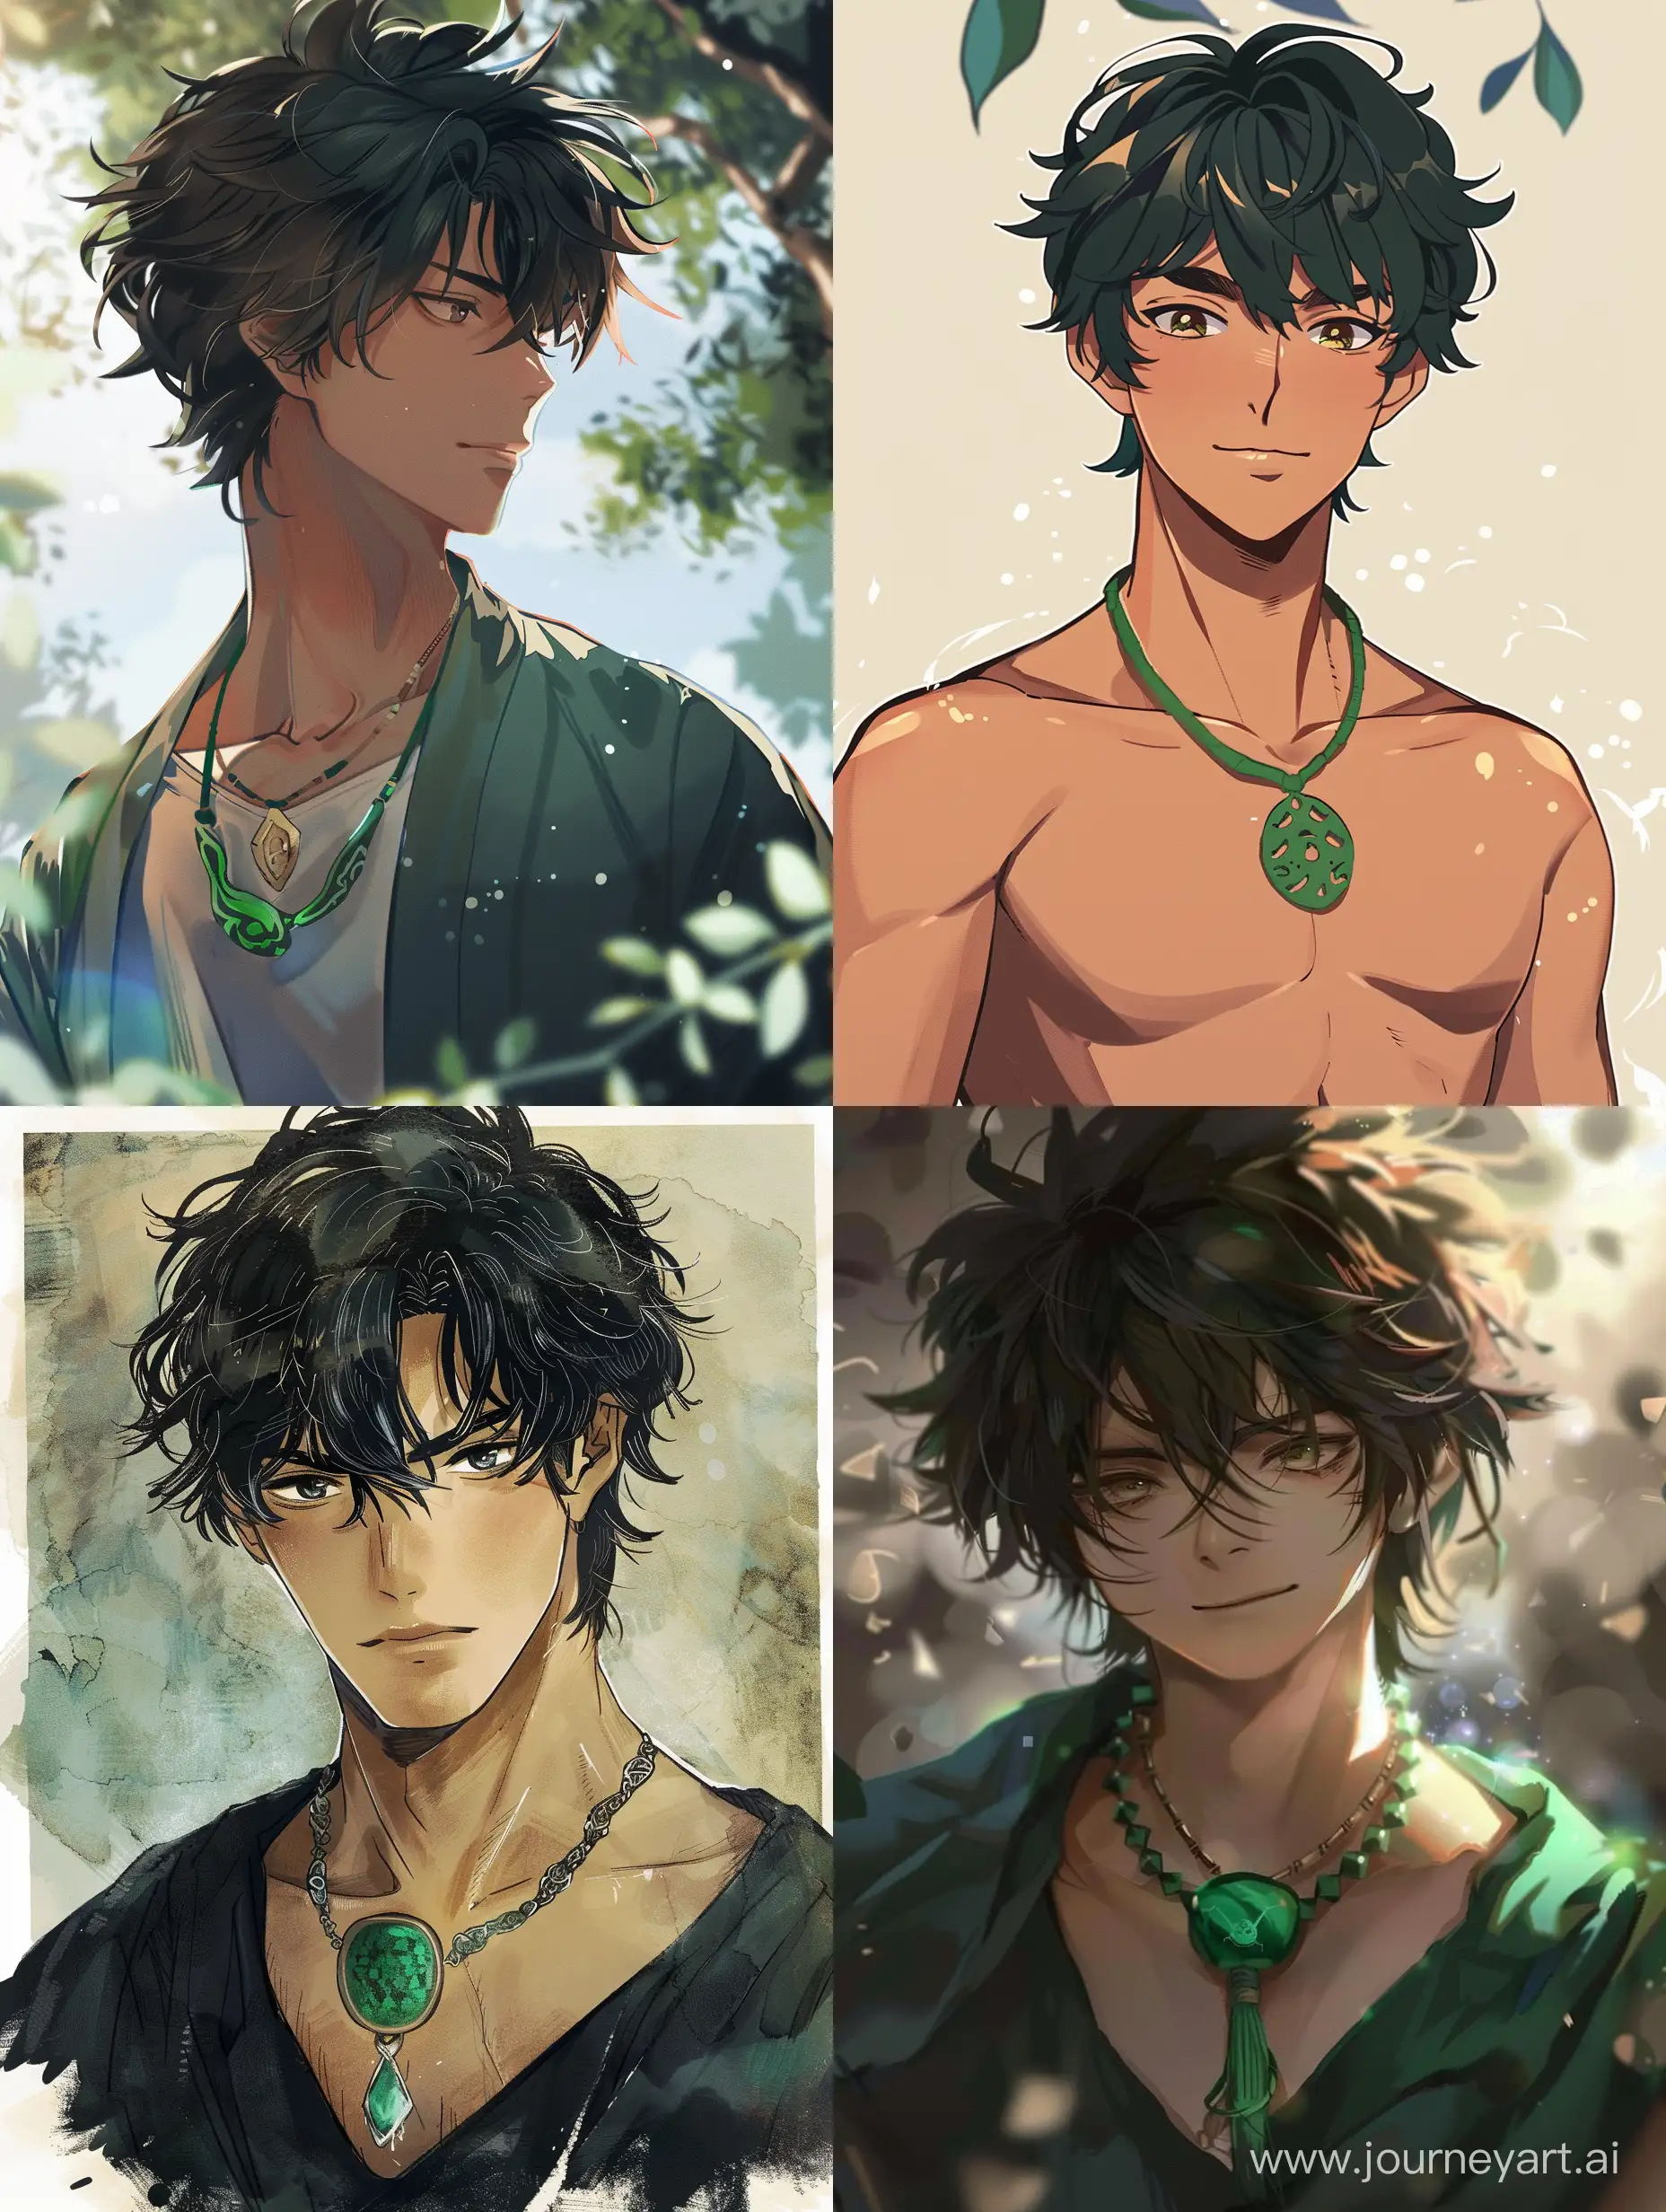 Teen-Boy-with-Green-Amulet-in-Fantasy-World